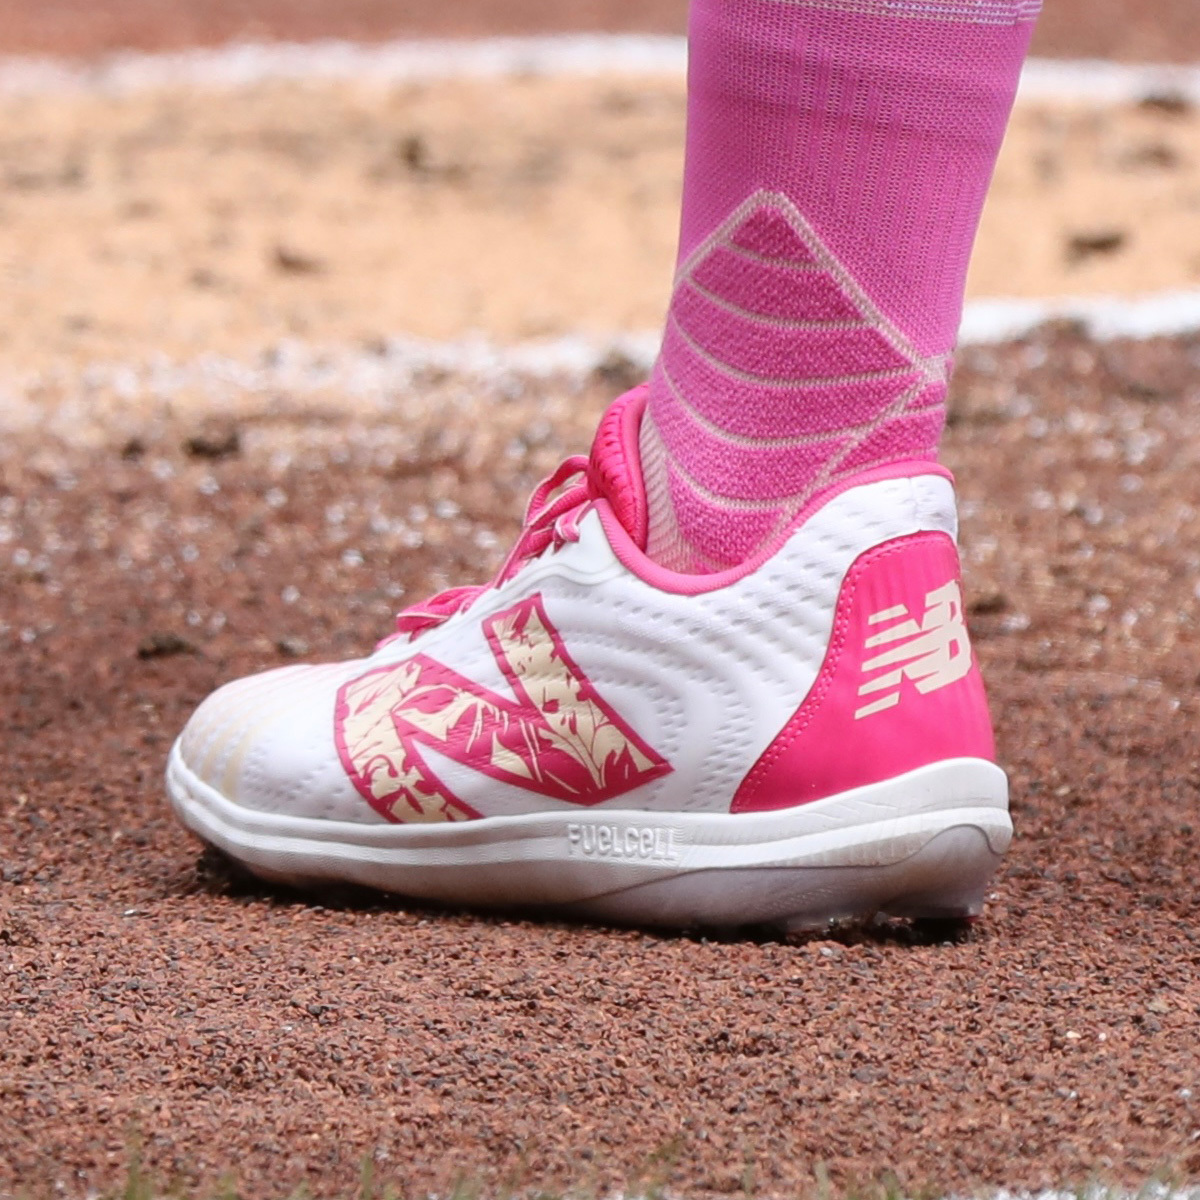 Pirates outfielder Bryan Reynolds wore a special New Balance cleat colorway for Mother's Day ❤️

'My mom always drove me to my games and practices growing up and always made sure I was taken care of and ready, so it’s special that I now get to represent her at the highest level'